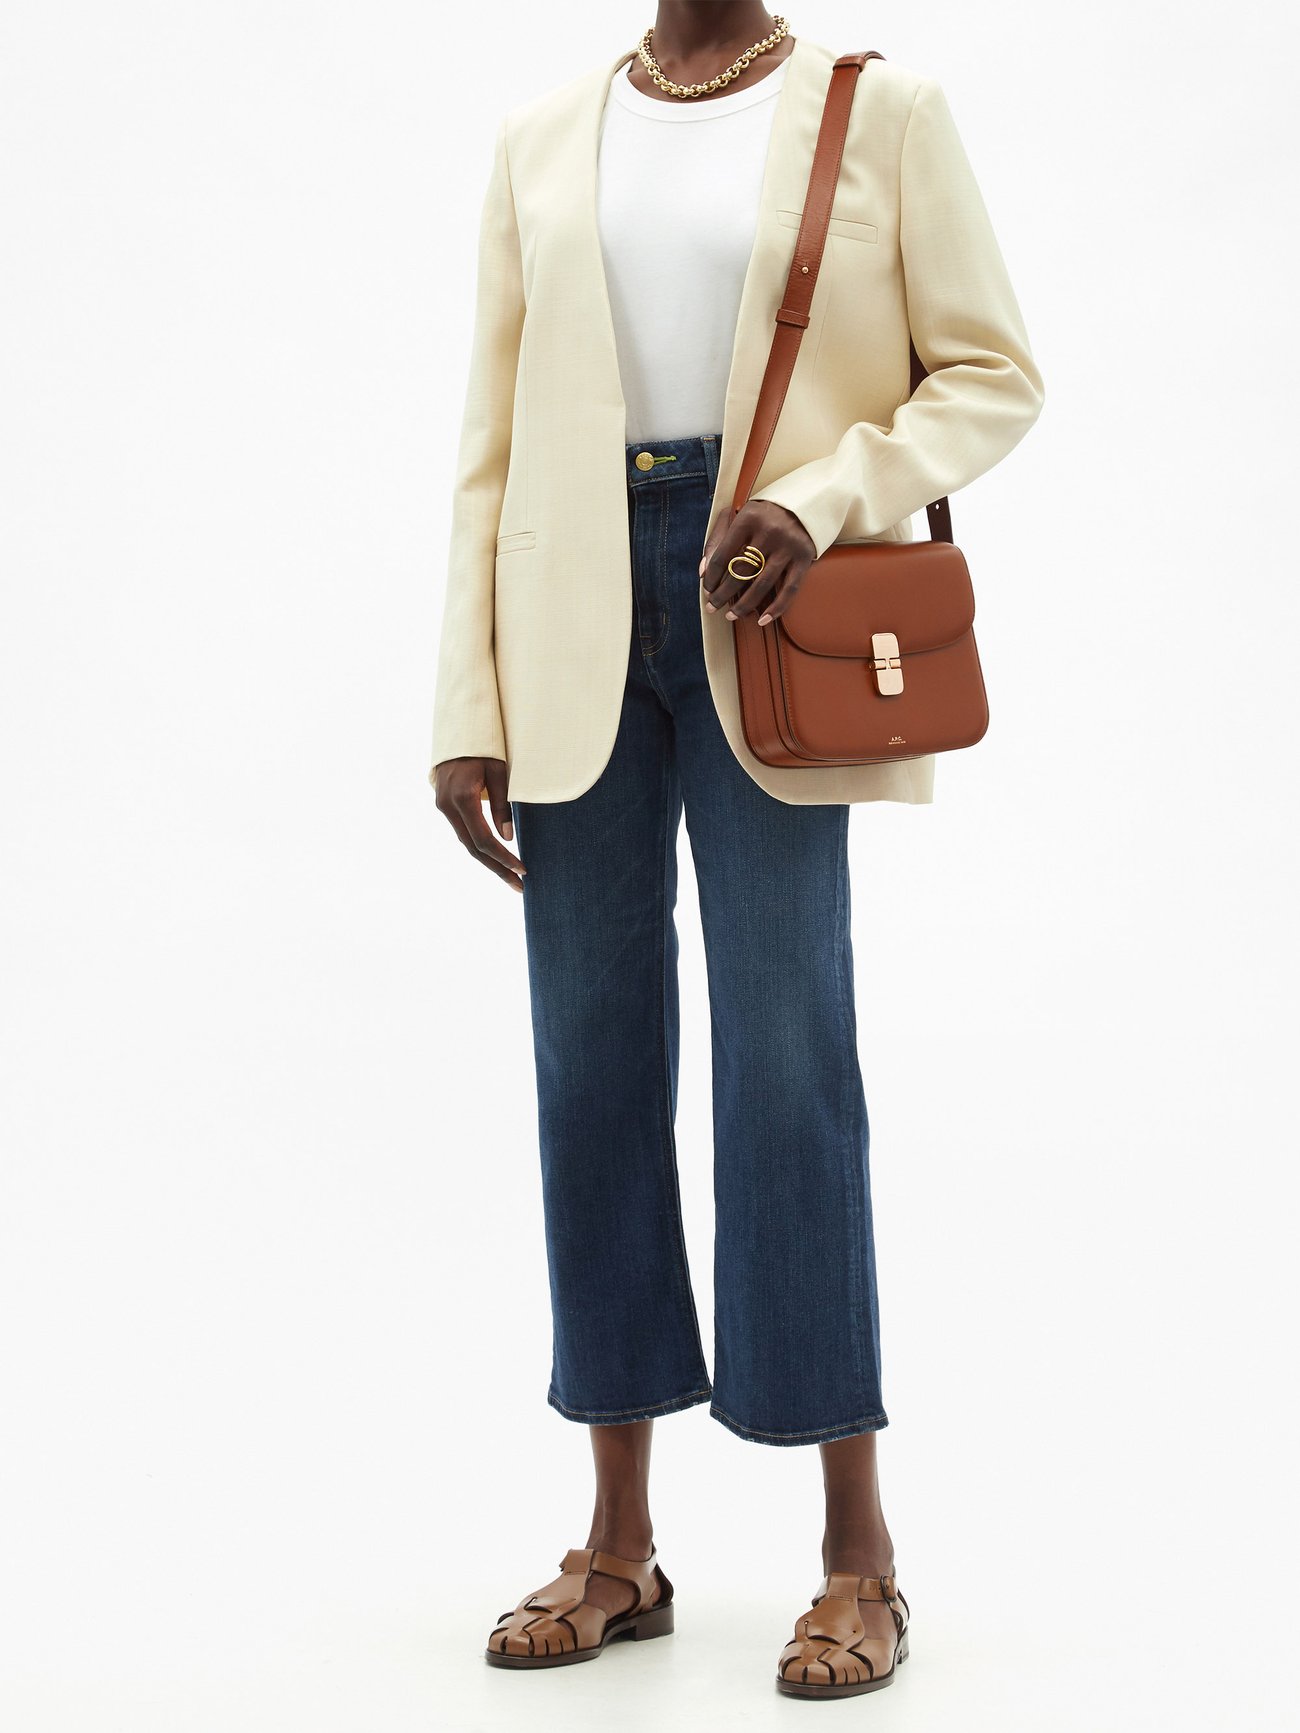 A.P.C. Grace Large Smooth-leather Cross-body Bag in Green